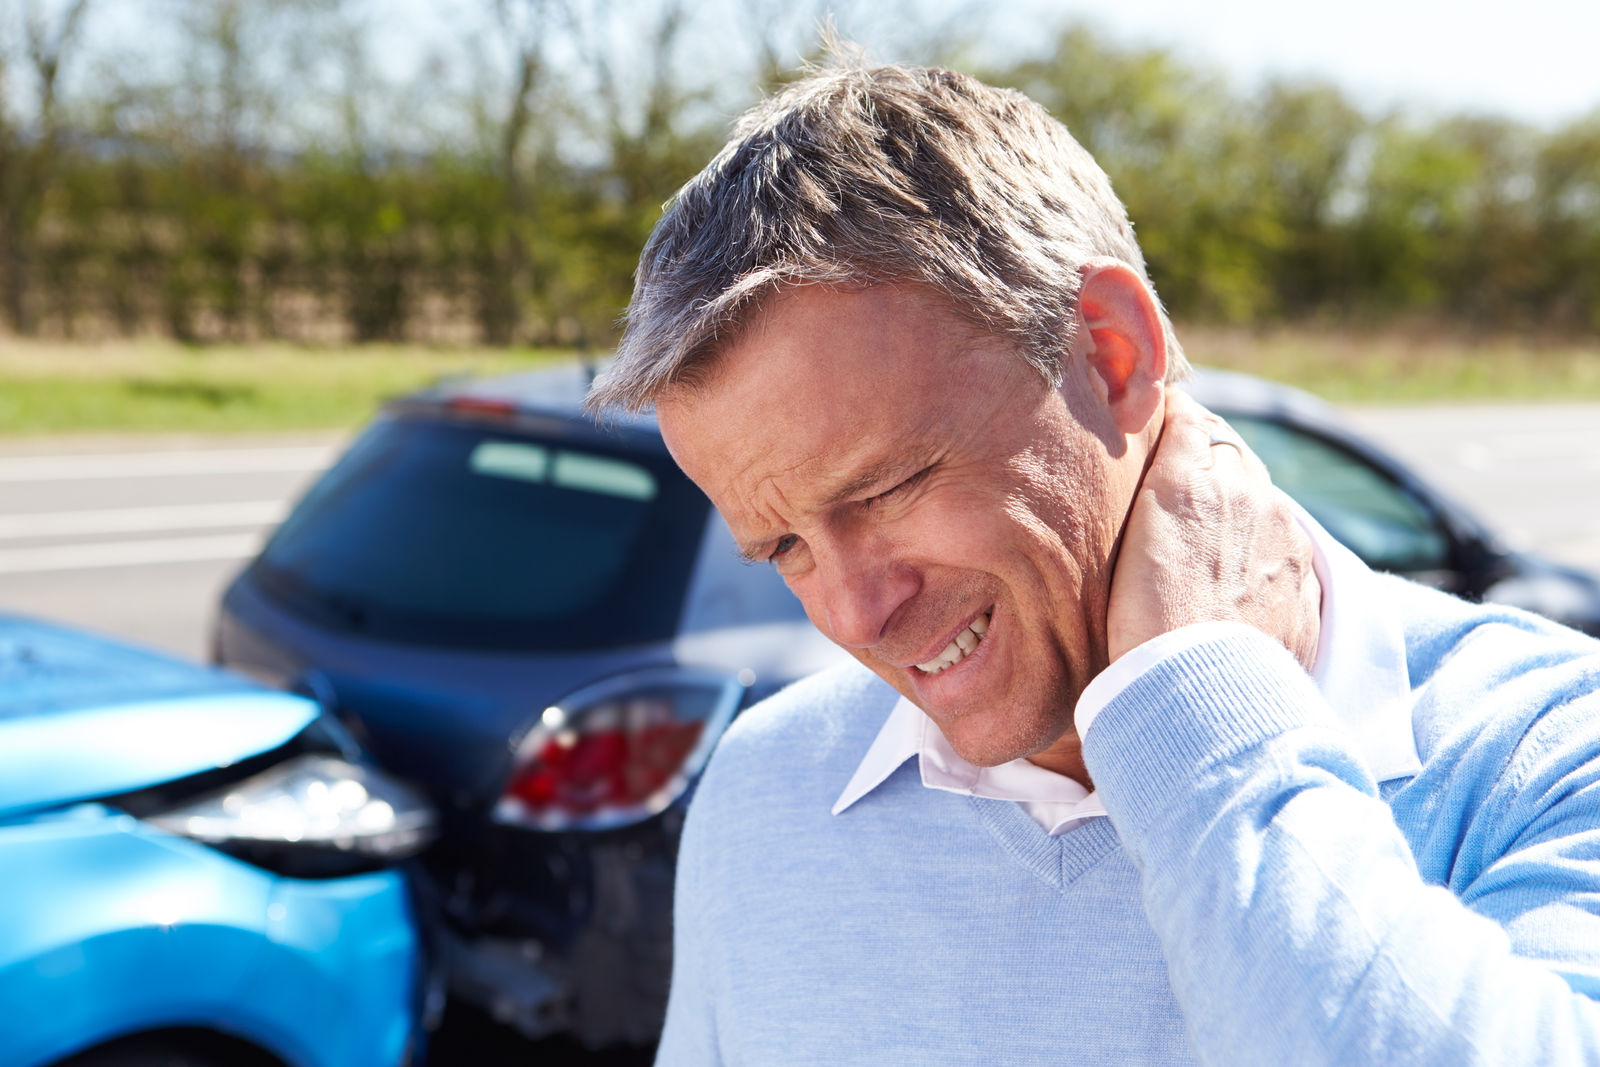 Does my car insurance cover personal injury claims?